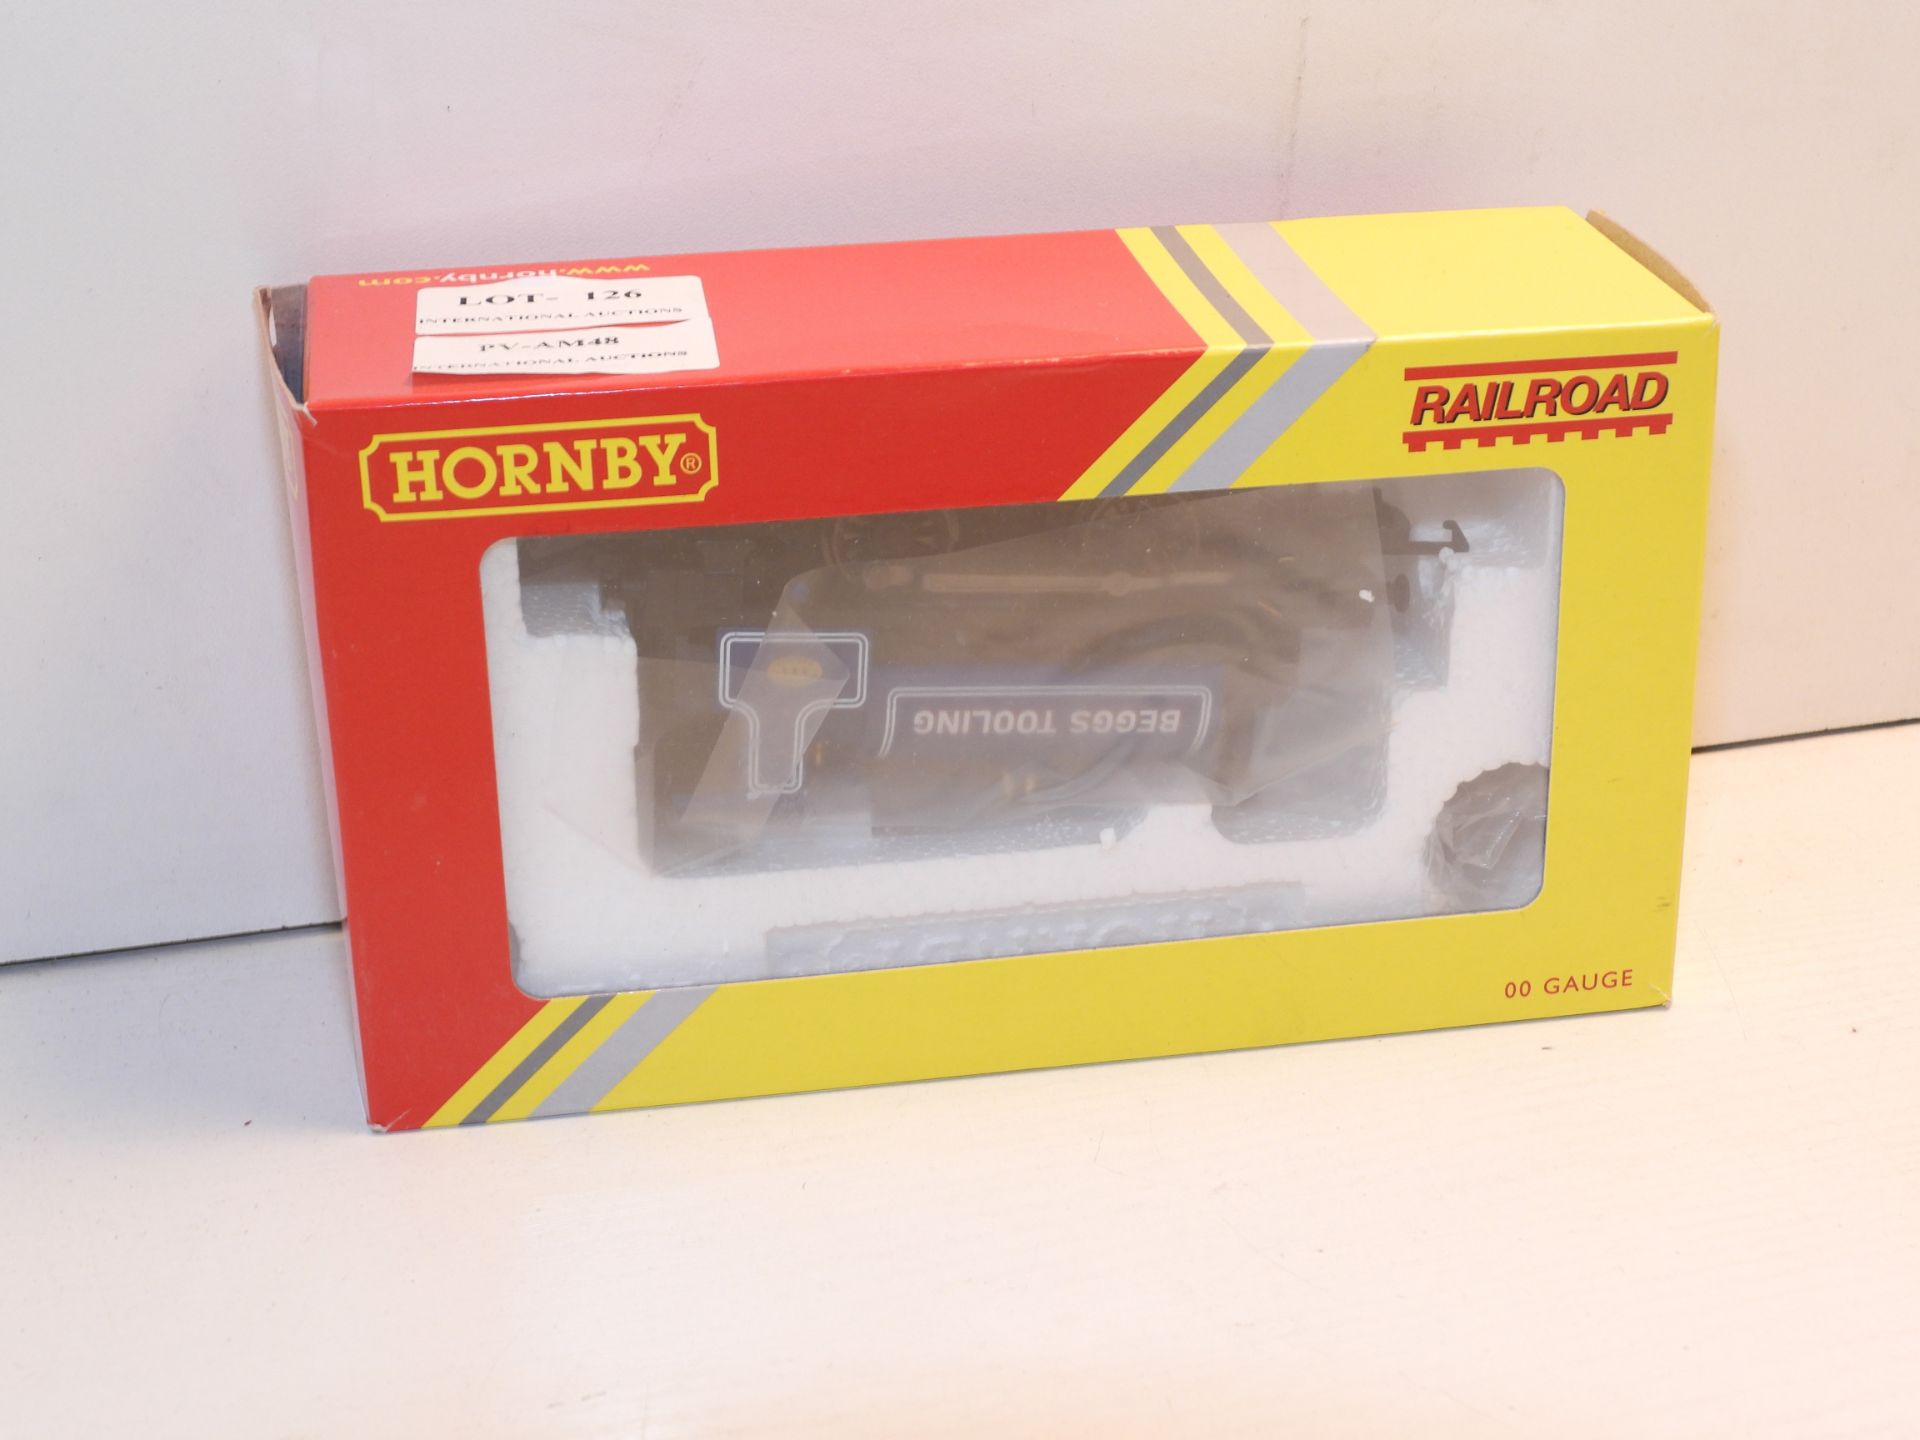 BOXED HORNBY 00 GAUGE RAILROAD BEGGS TOOLING TRAIN Condition ReportAppraisal Available on Request-